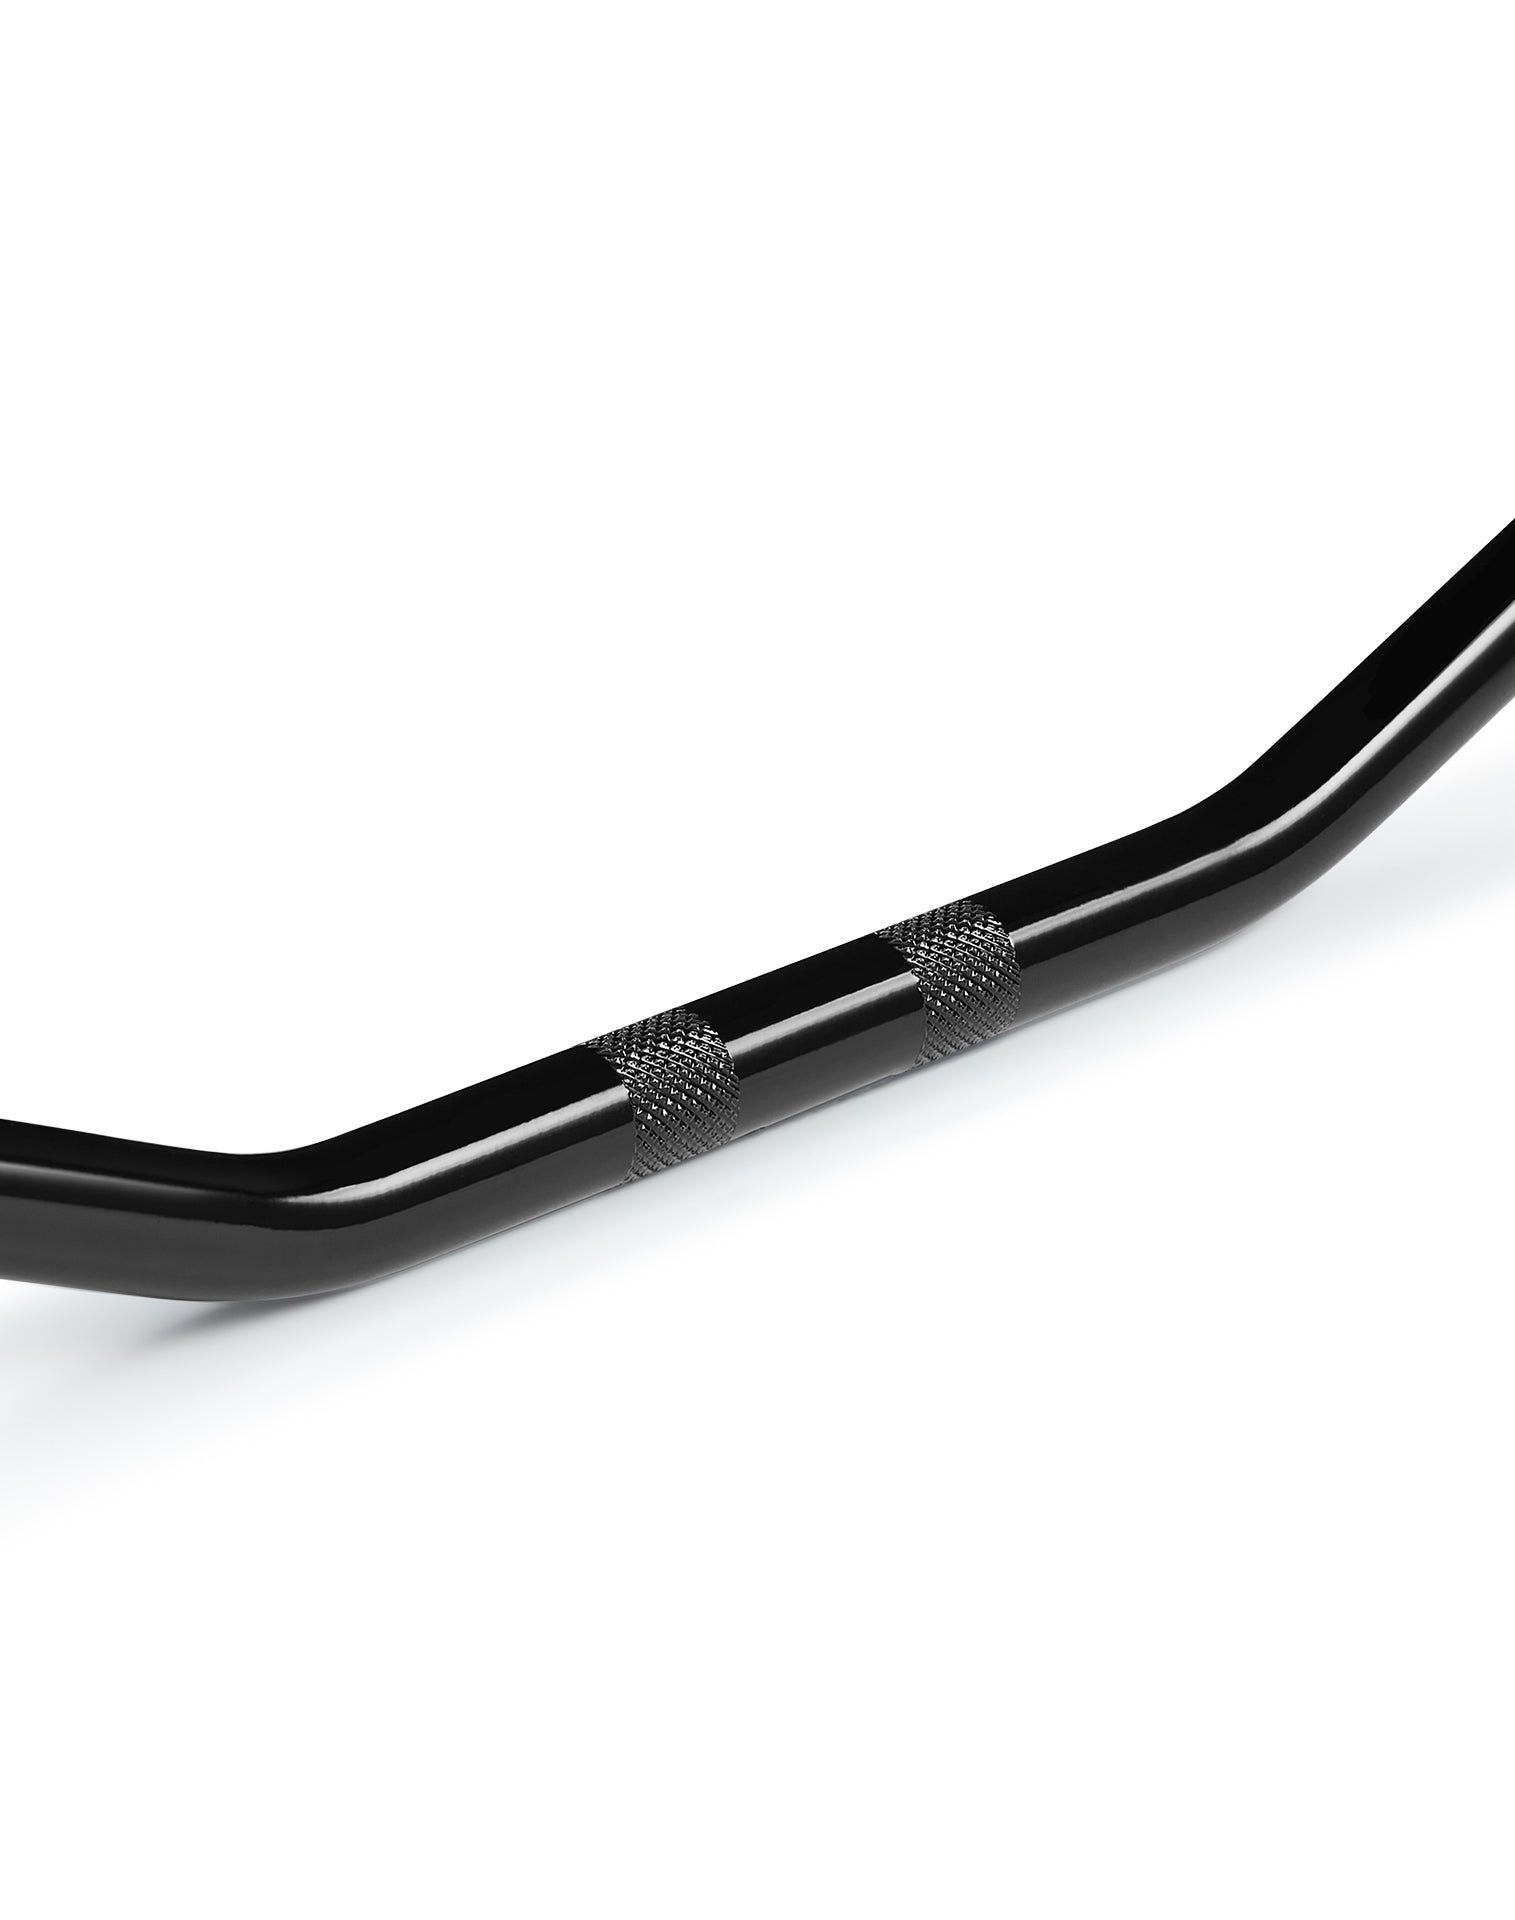 Viking Iron Born Drag Handlebar For Harley Dyna Super Glide FXD Gloss Black Close Up View